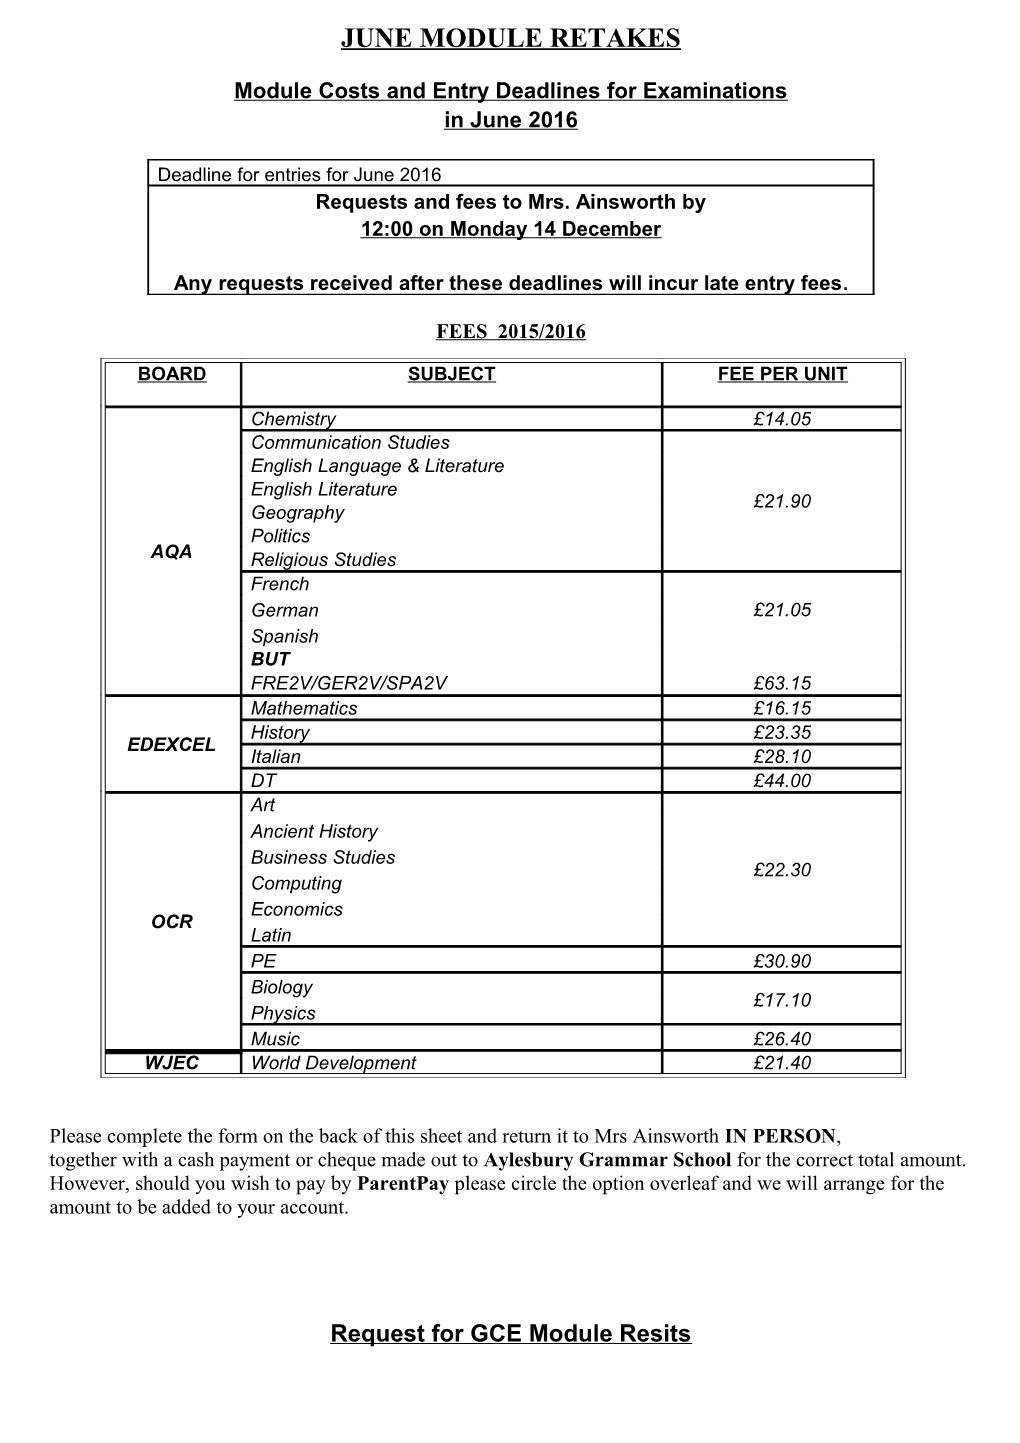 Module Costs and Entry Deadlines for Examinations